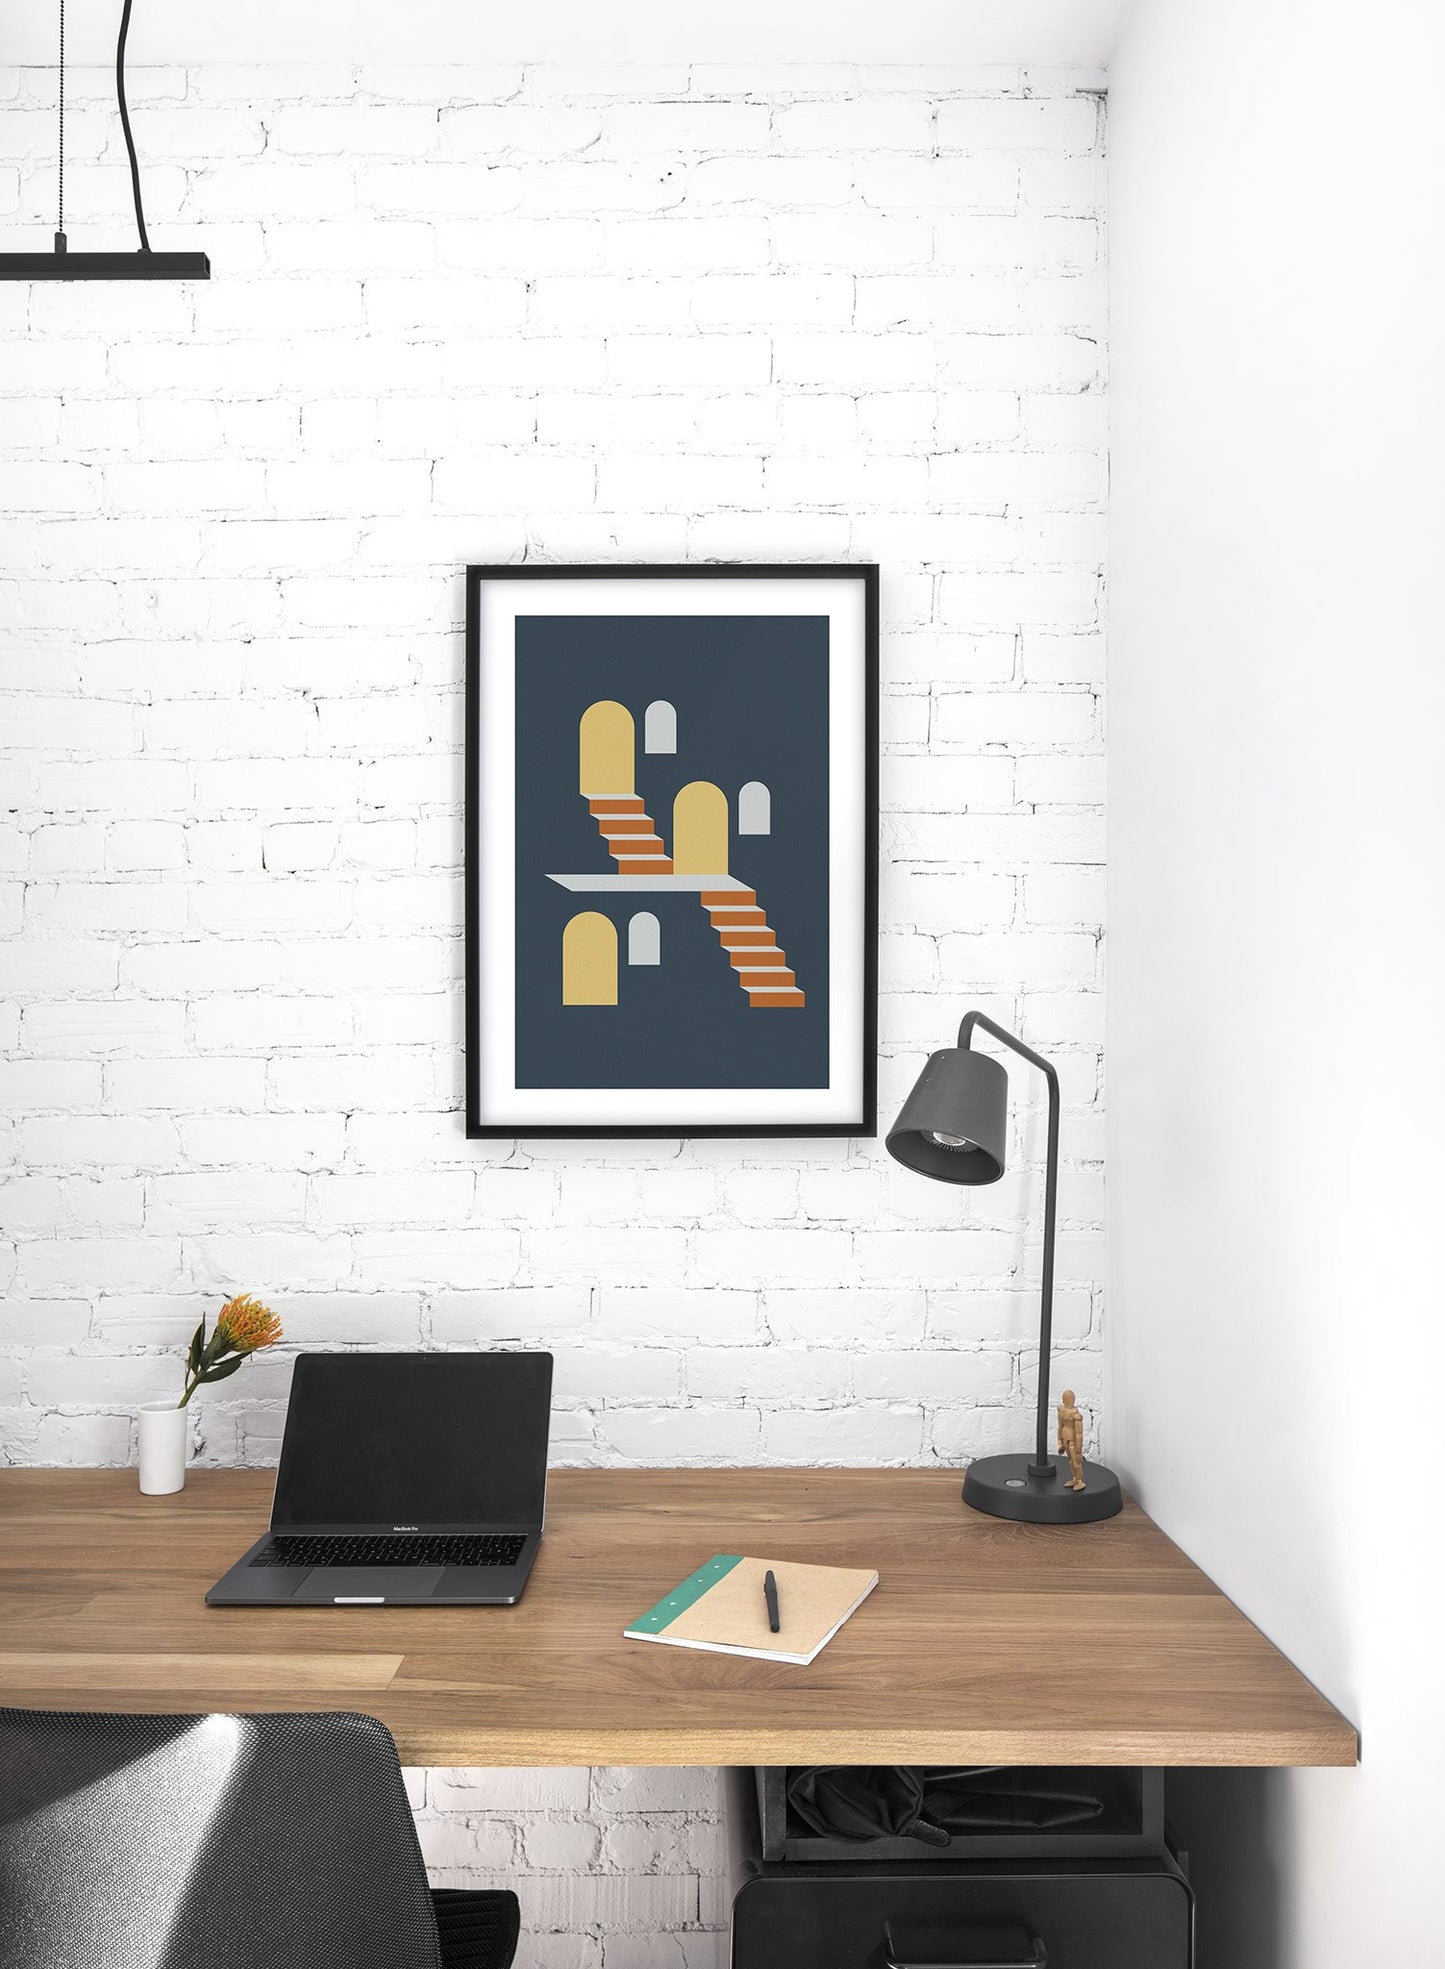 Minimalist design poster by Opposite Wall with Two Flights abstract graphic design - Lifestyle - Office Desk